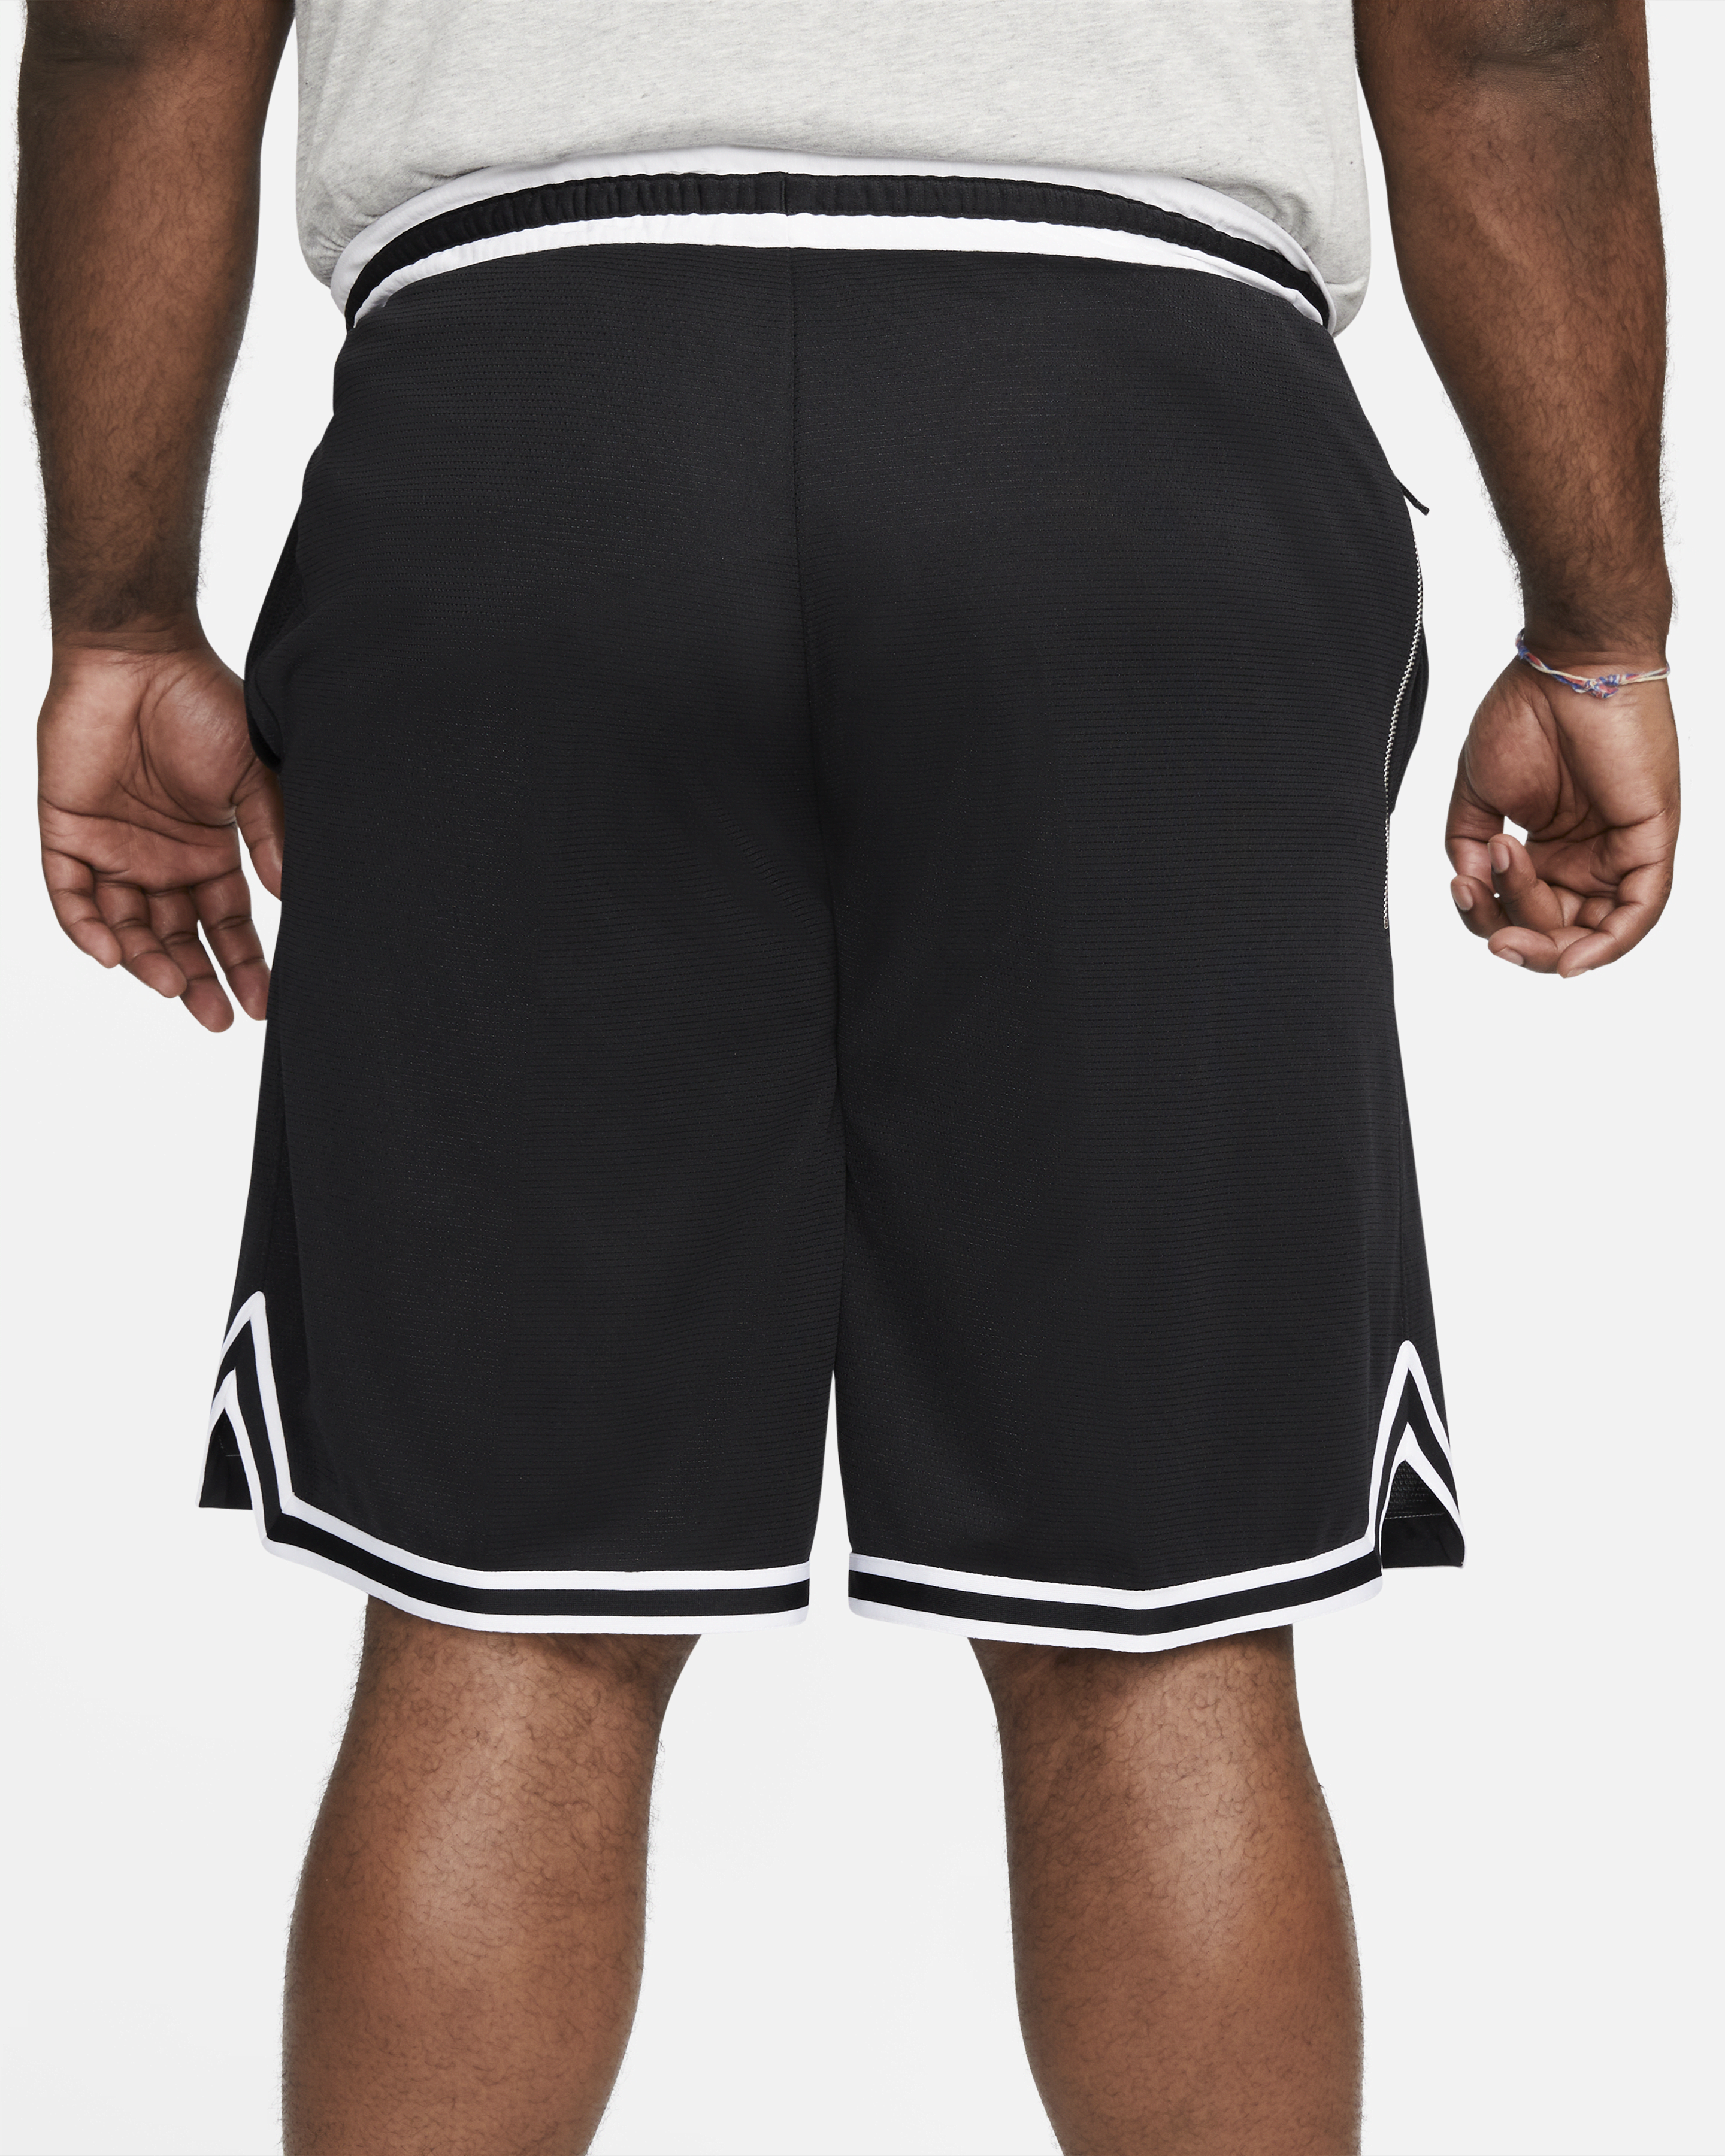 Mens Sports Short Quick Dry Polyester Vintage Basketball Shorts